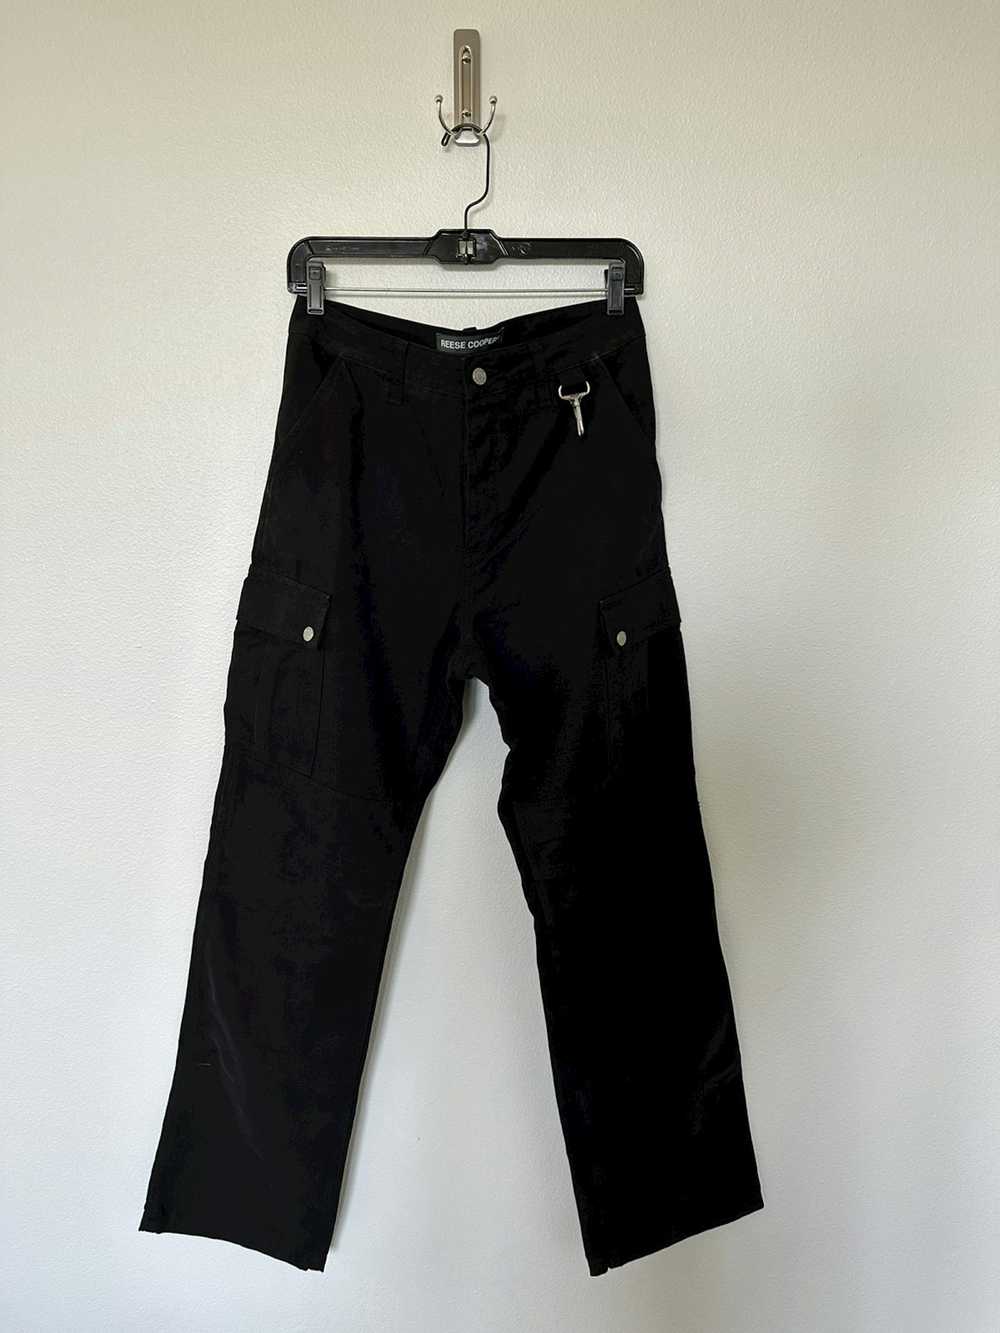 Reese Cooper Reese Cooper Cargo Pant - image 1